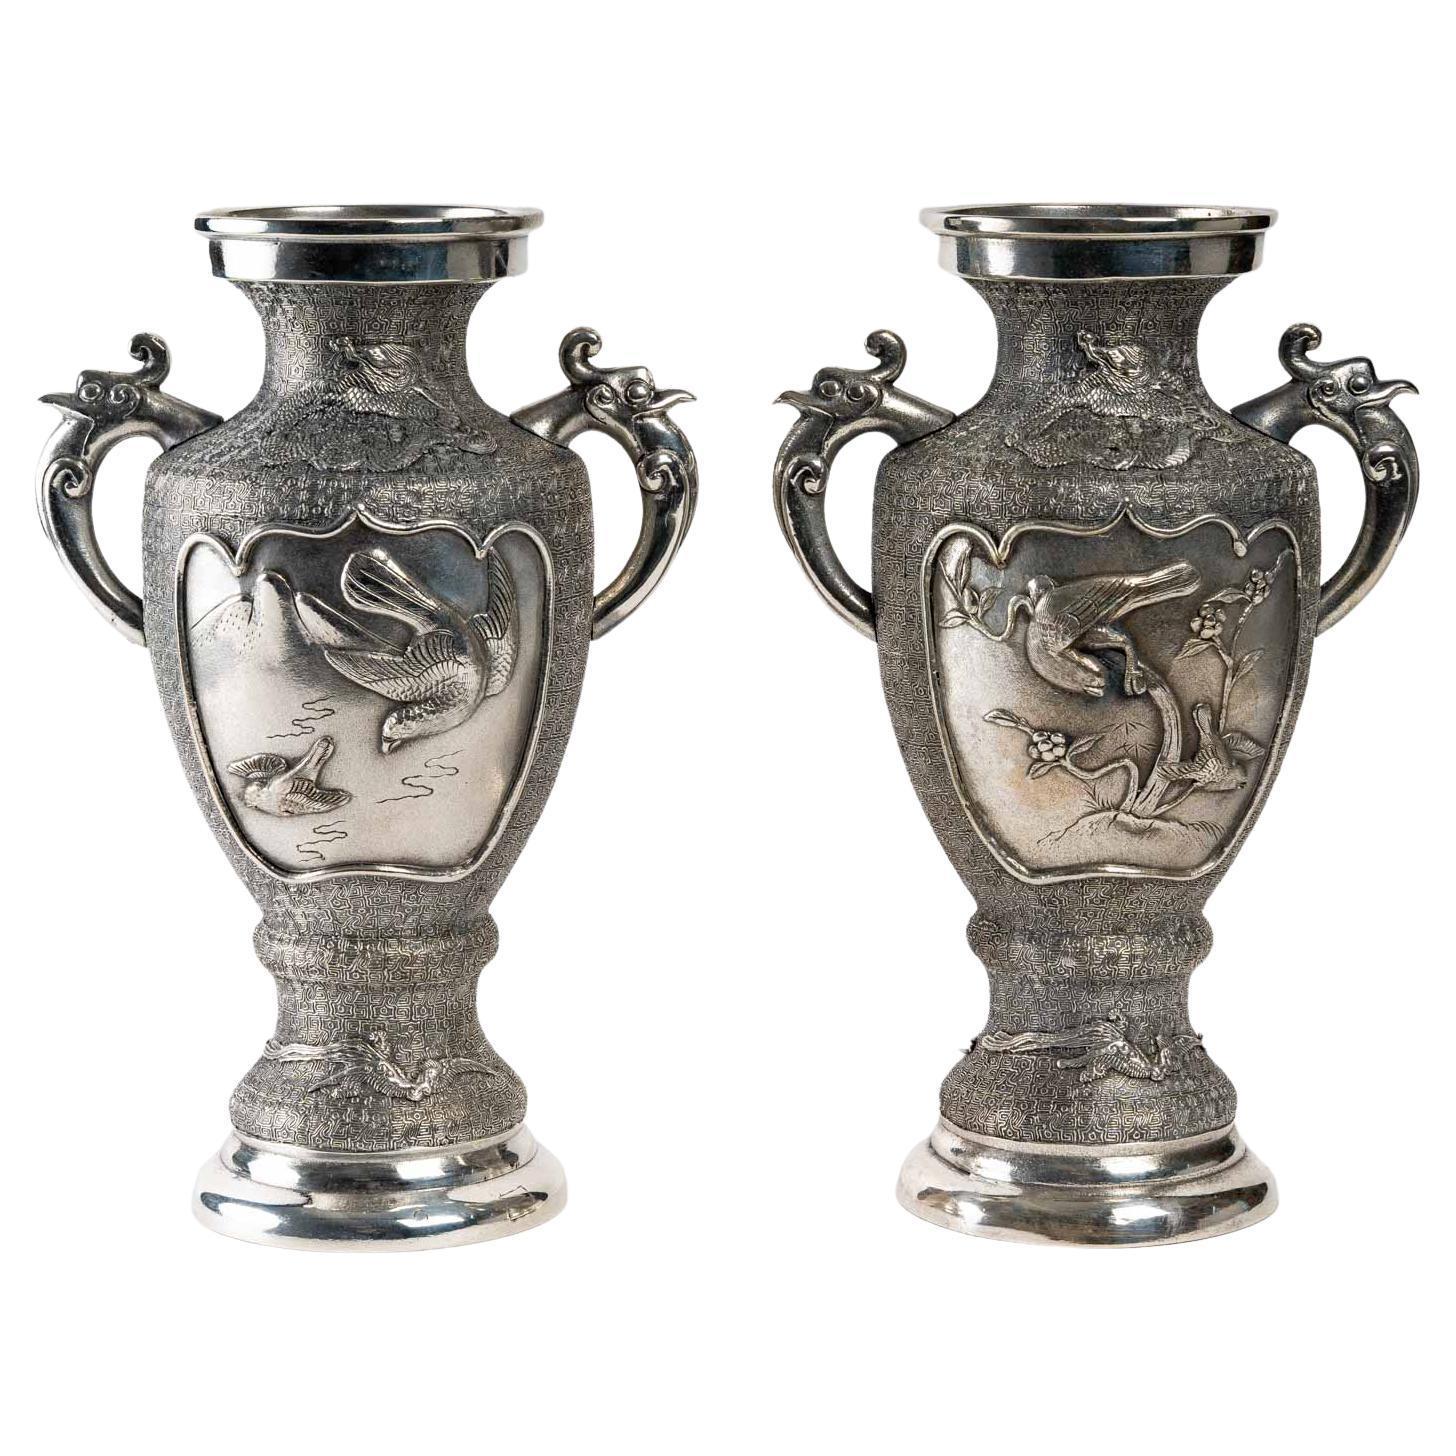 Pair of Silvered Metal Vases, Asia, early 20th century. Decorated with dragons and birds.
Measures H: 31. 5, W: 23 cm, D: 16 cm.